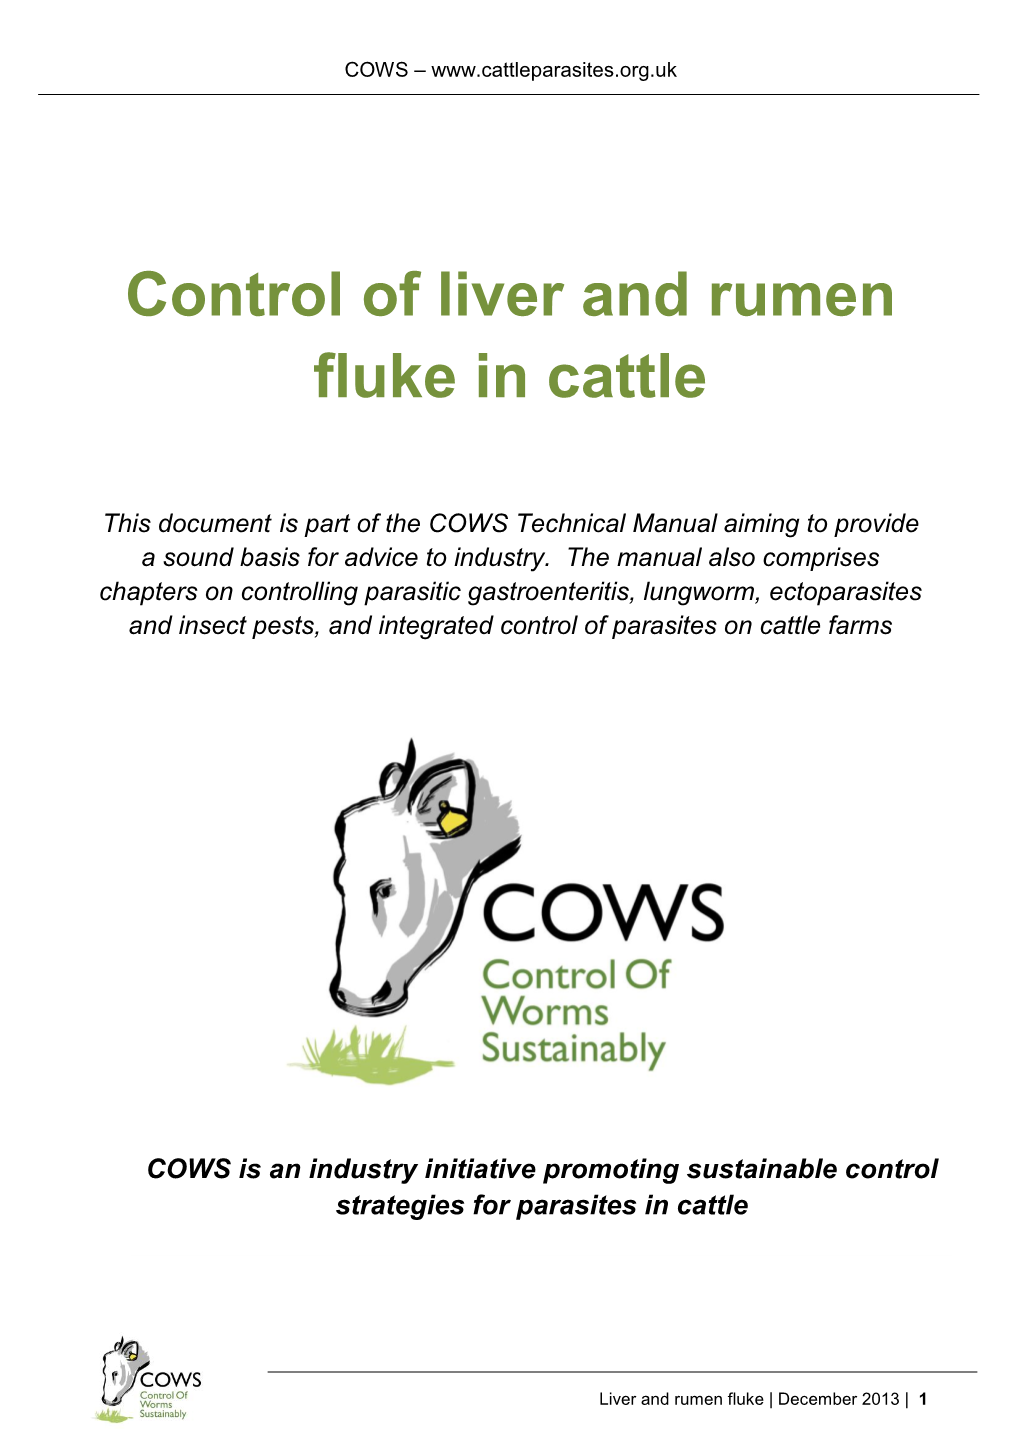 Control of Liver and Rumen Fluke in Cattle